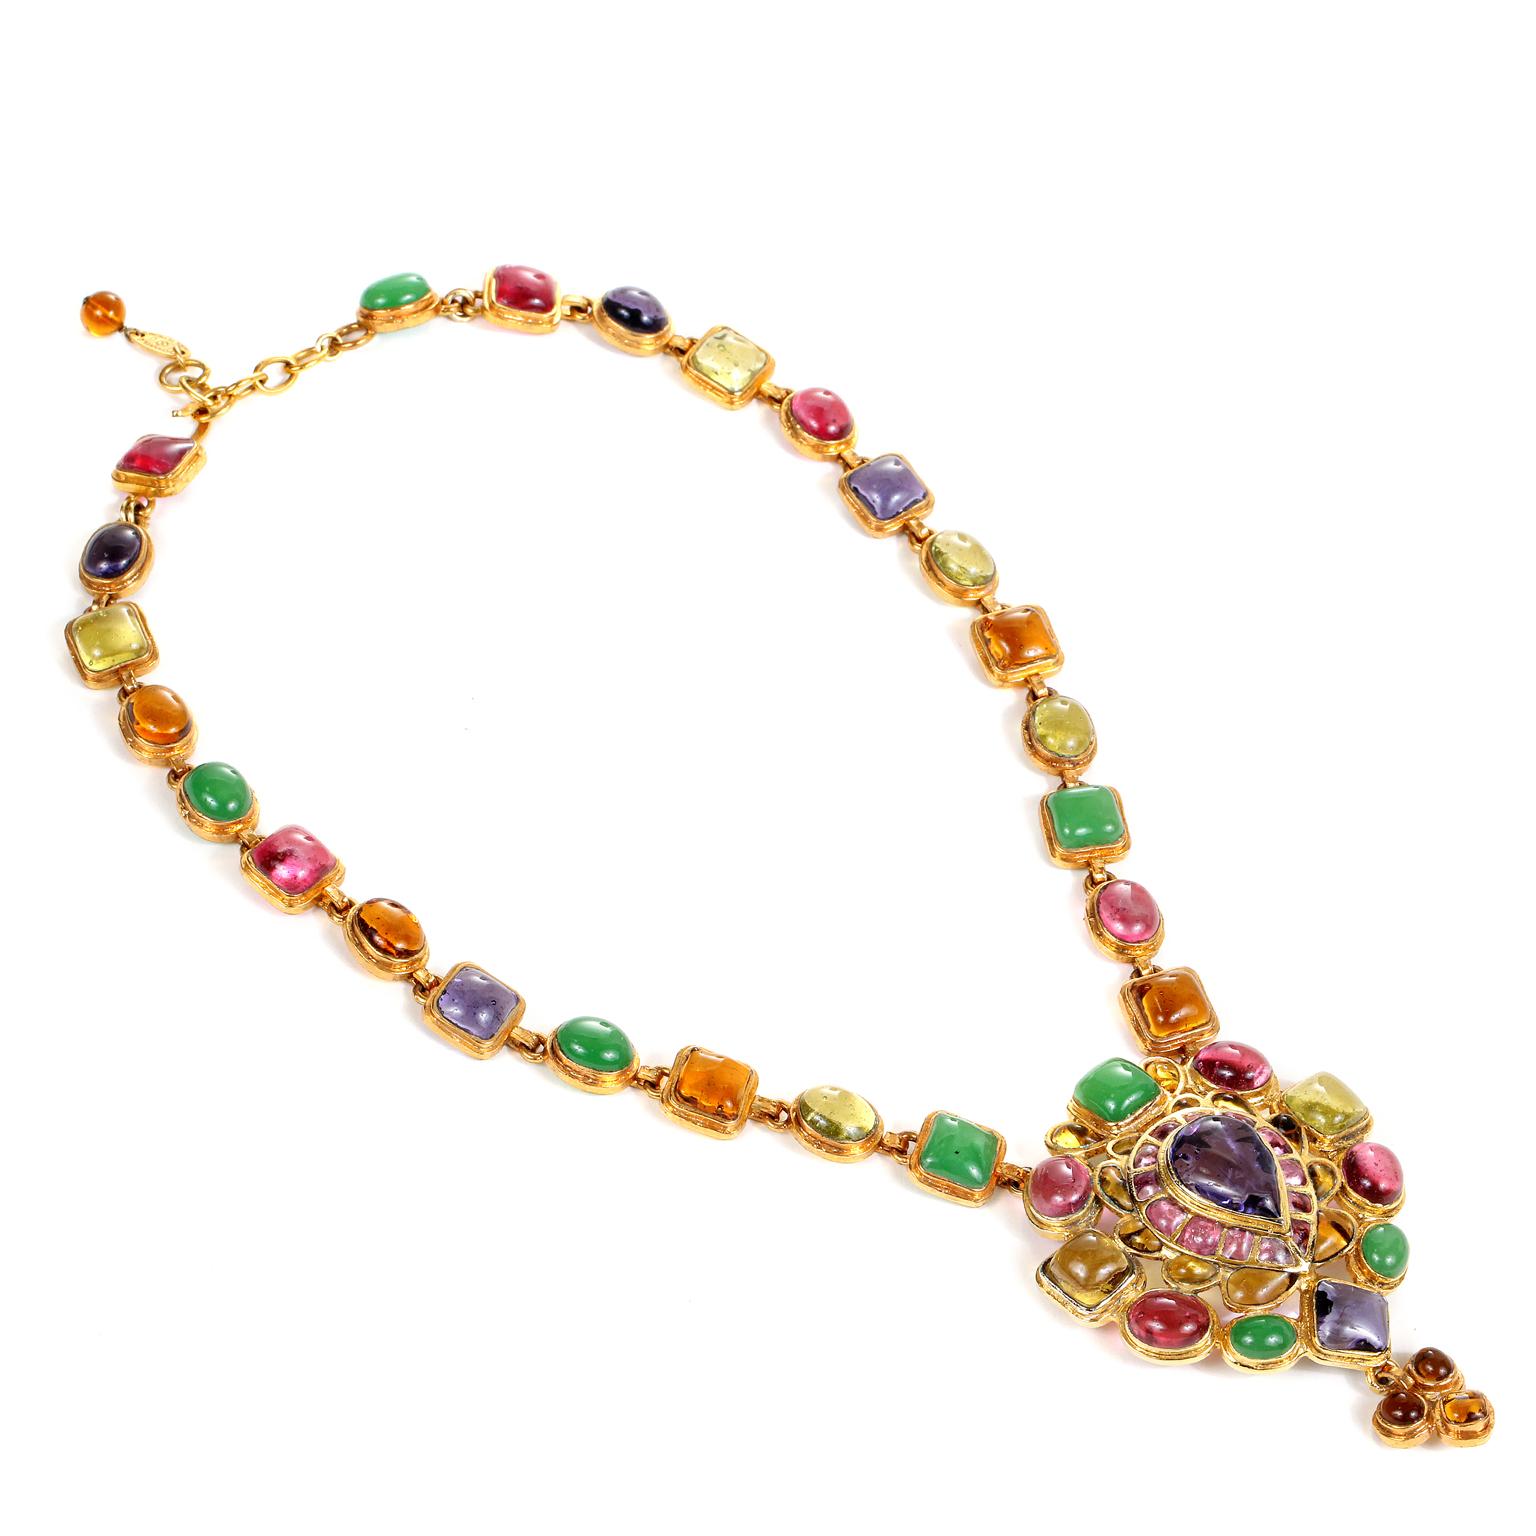 This authentic Chanel Gripoix Multicolor Drop Necklace is in excellent vintage condition from the mid 1980’s.  
Pink, purple, orange, yellow and green oval and square Gripoix glass stones are set in gold tone metal.   Dramatic multihued Gripoix